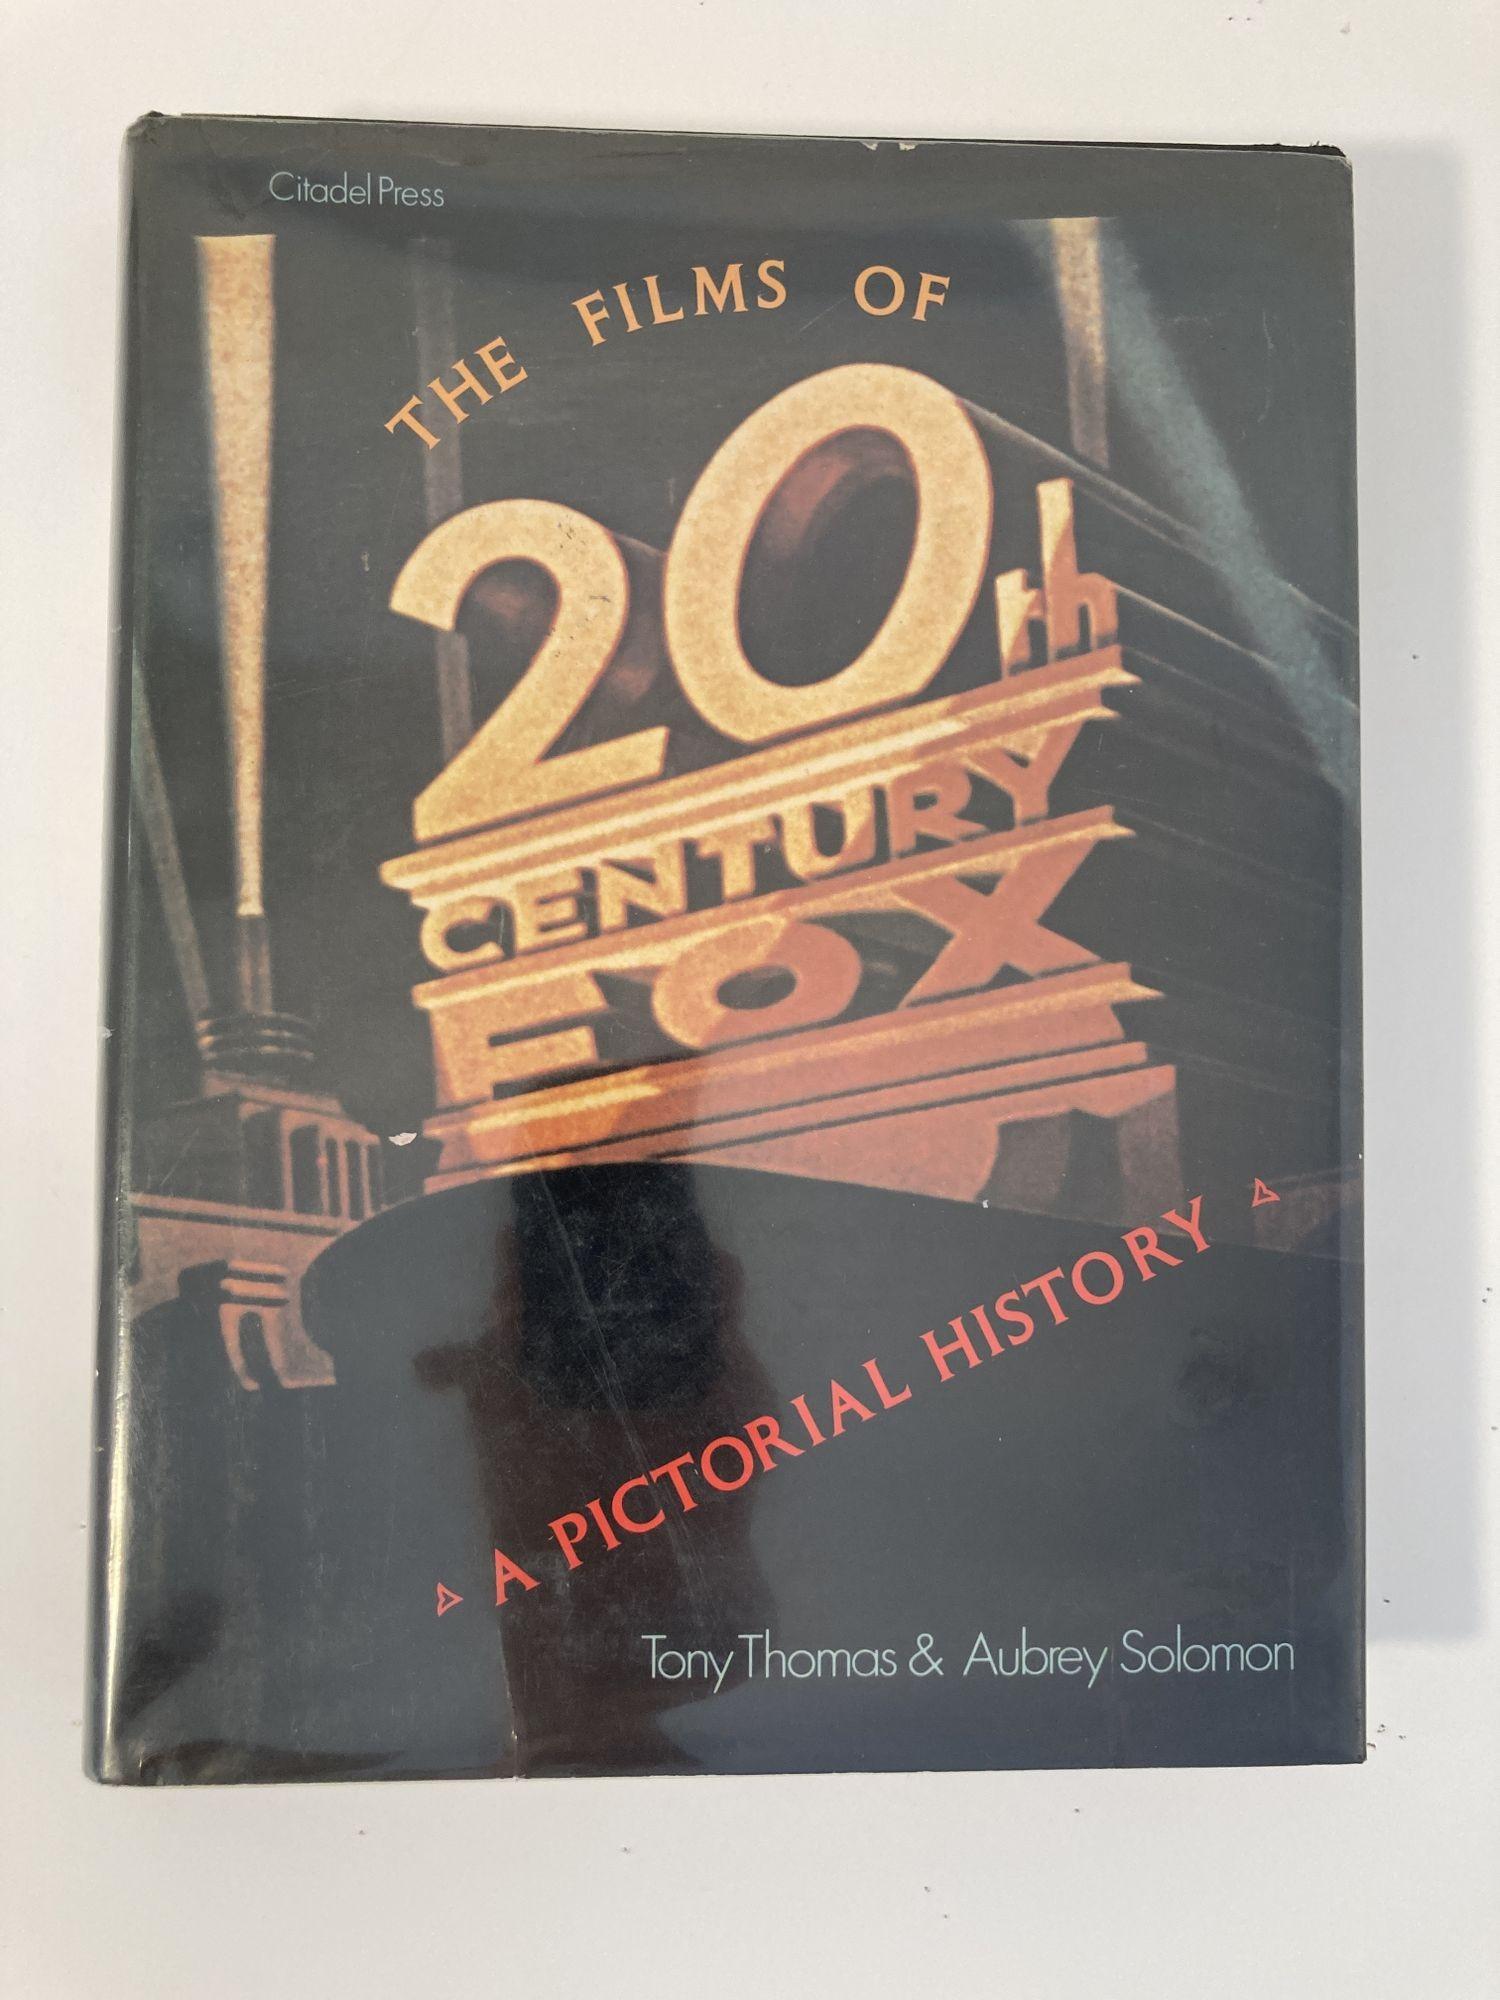 The Films of 20th Century Fox : A Pictorial History 1st Edition 1979.
Author Thomas, Tony & Solomon, Aubrey.
A 1st ed. very good- hardcover coffee table book.
Every 20th Century-Fox film is presented with its history, plot outline, cast and